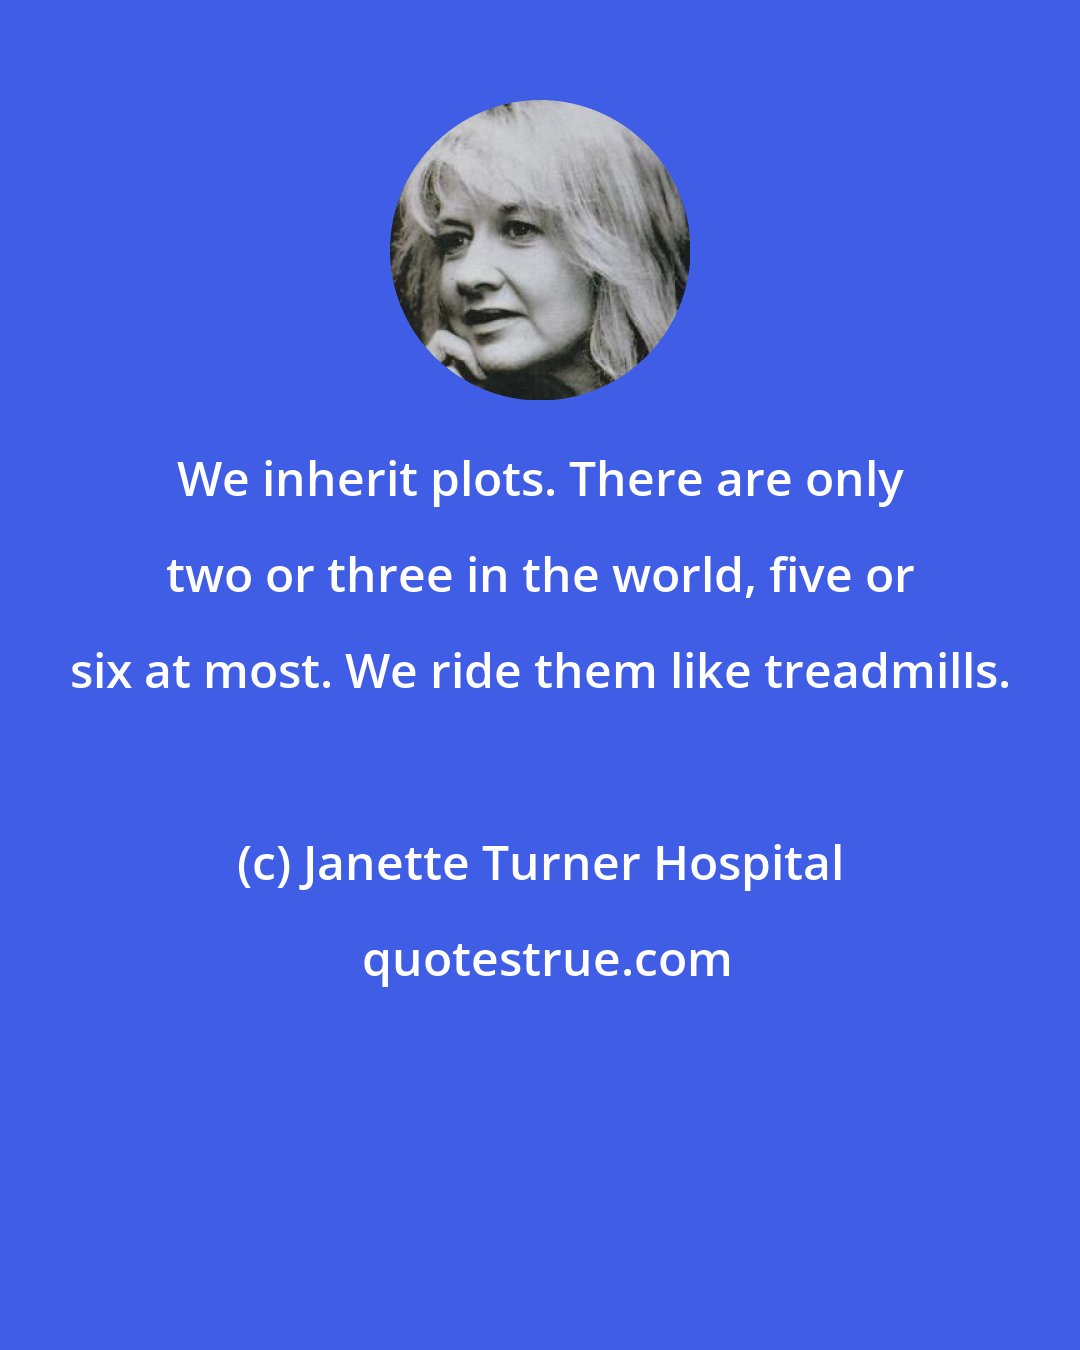 Janette Turner Hospital: We inherit plots. There are only two or three in the world, five or six at most. We ride them like treadmills.